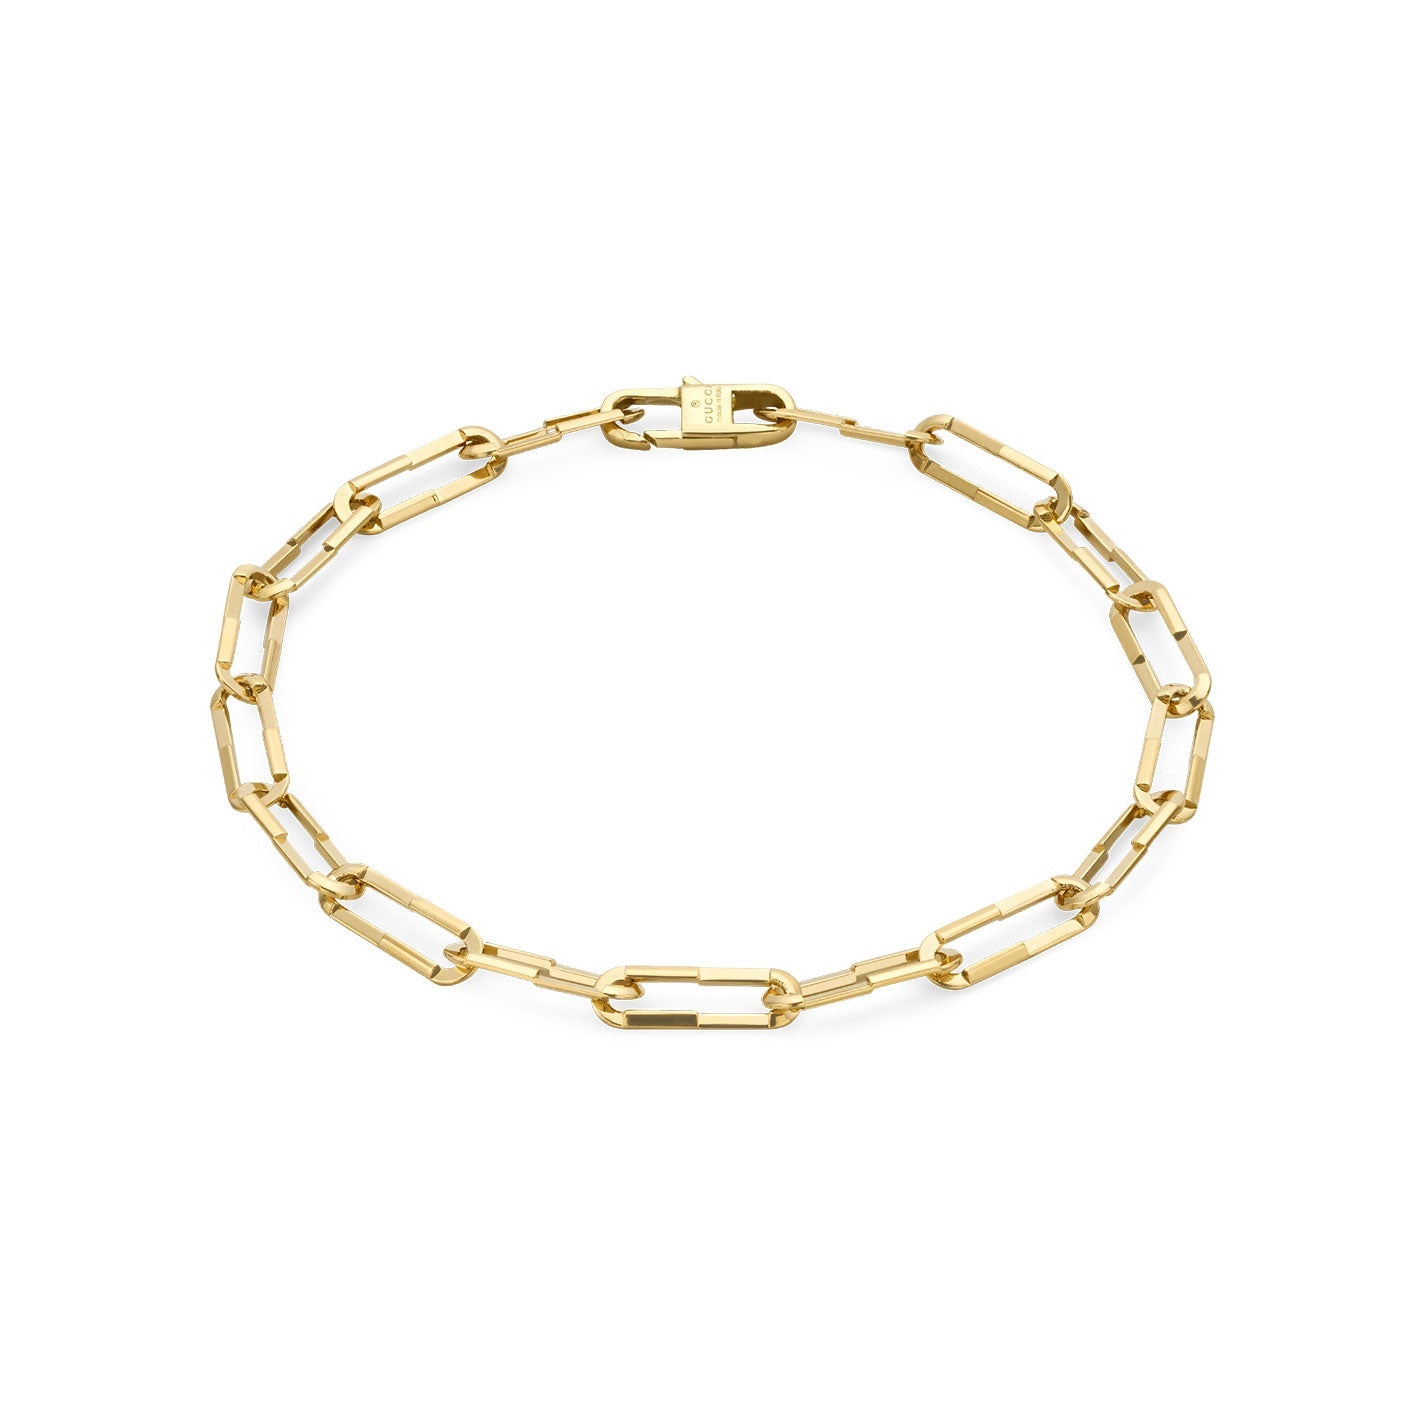 Gucci Link to Love 18K Yellow Gold Chain Bracelet